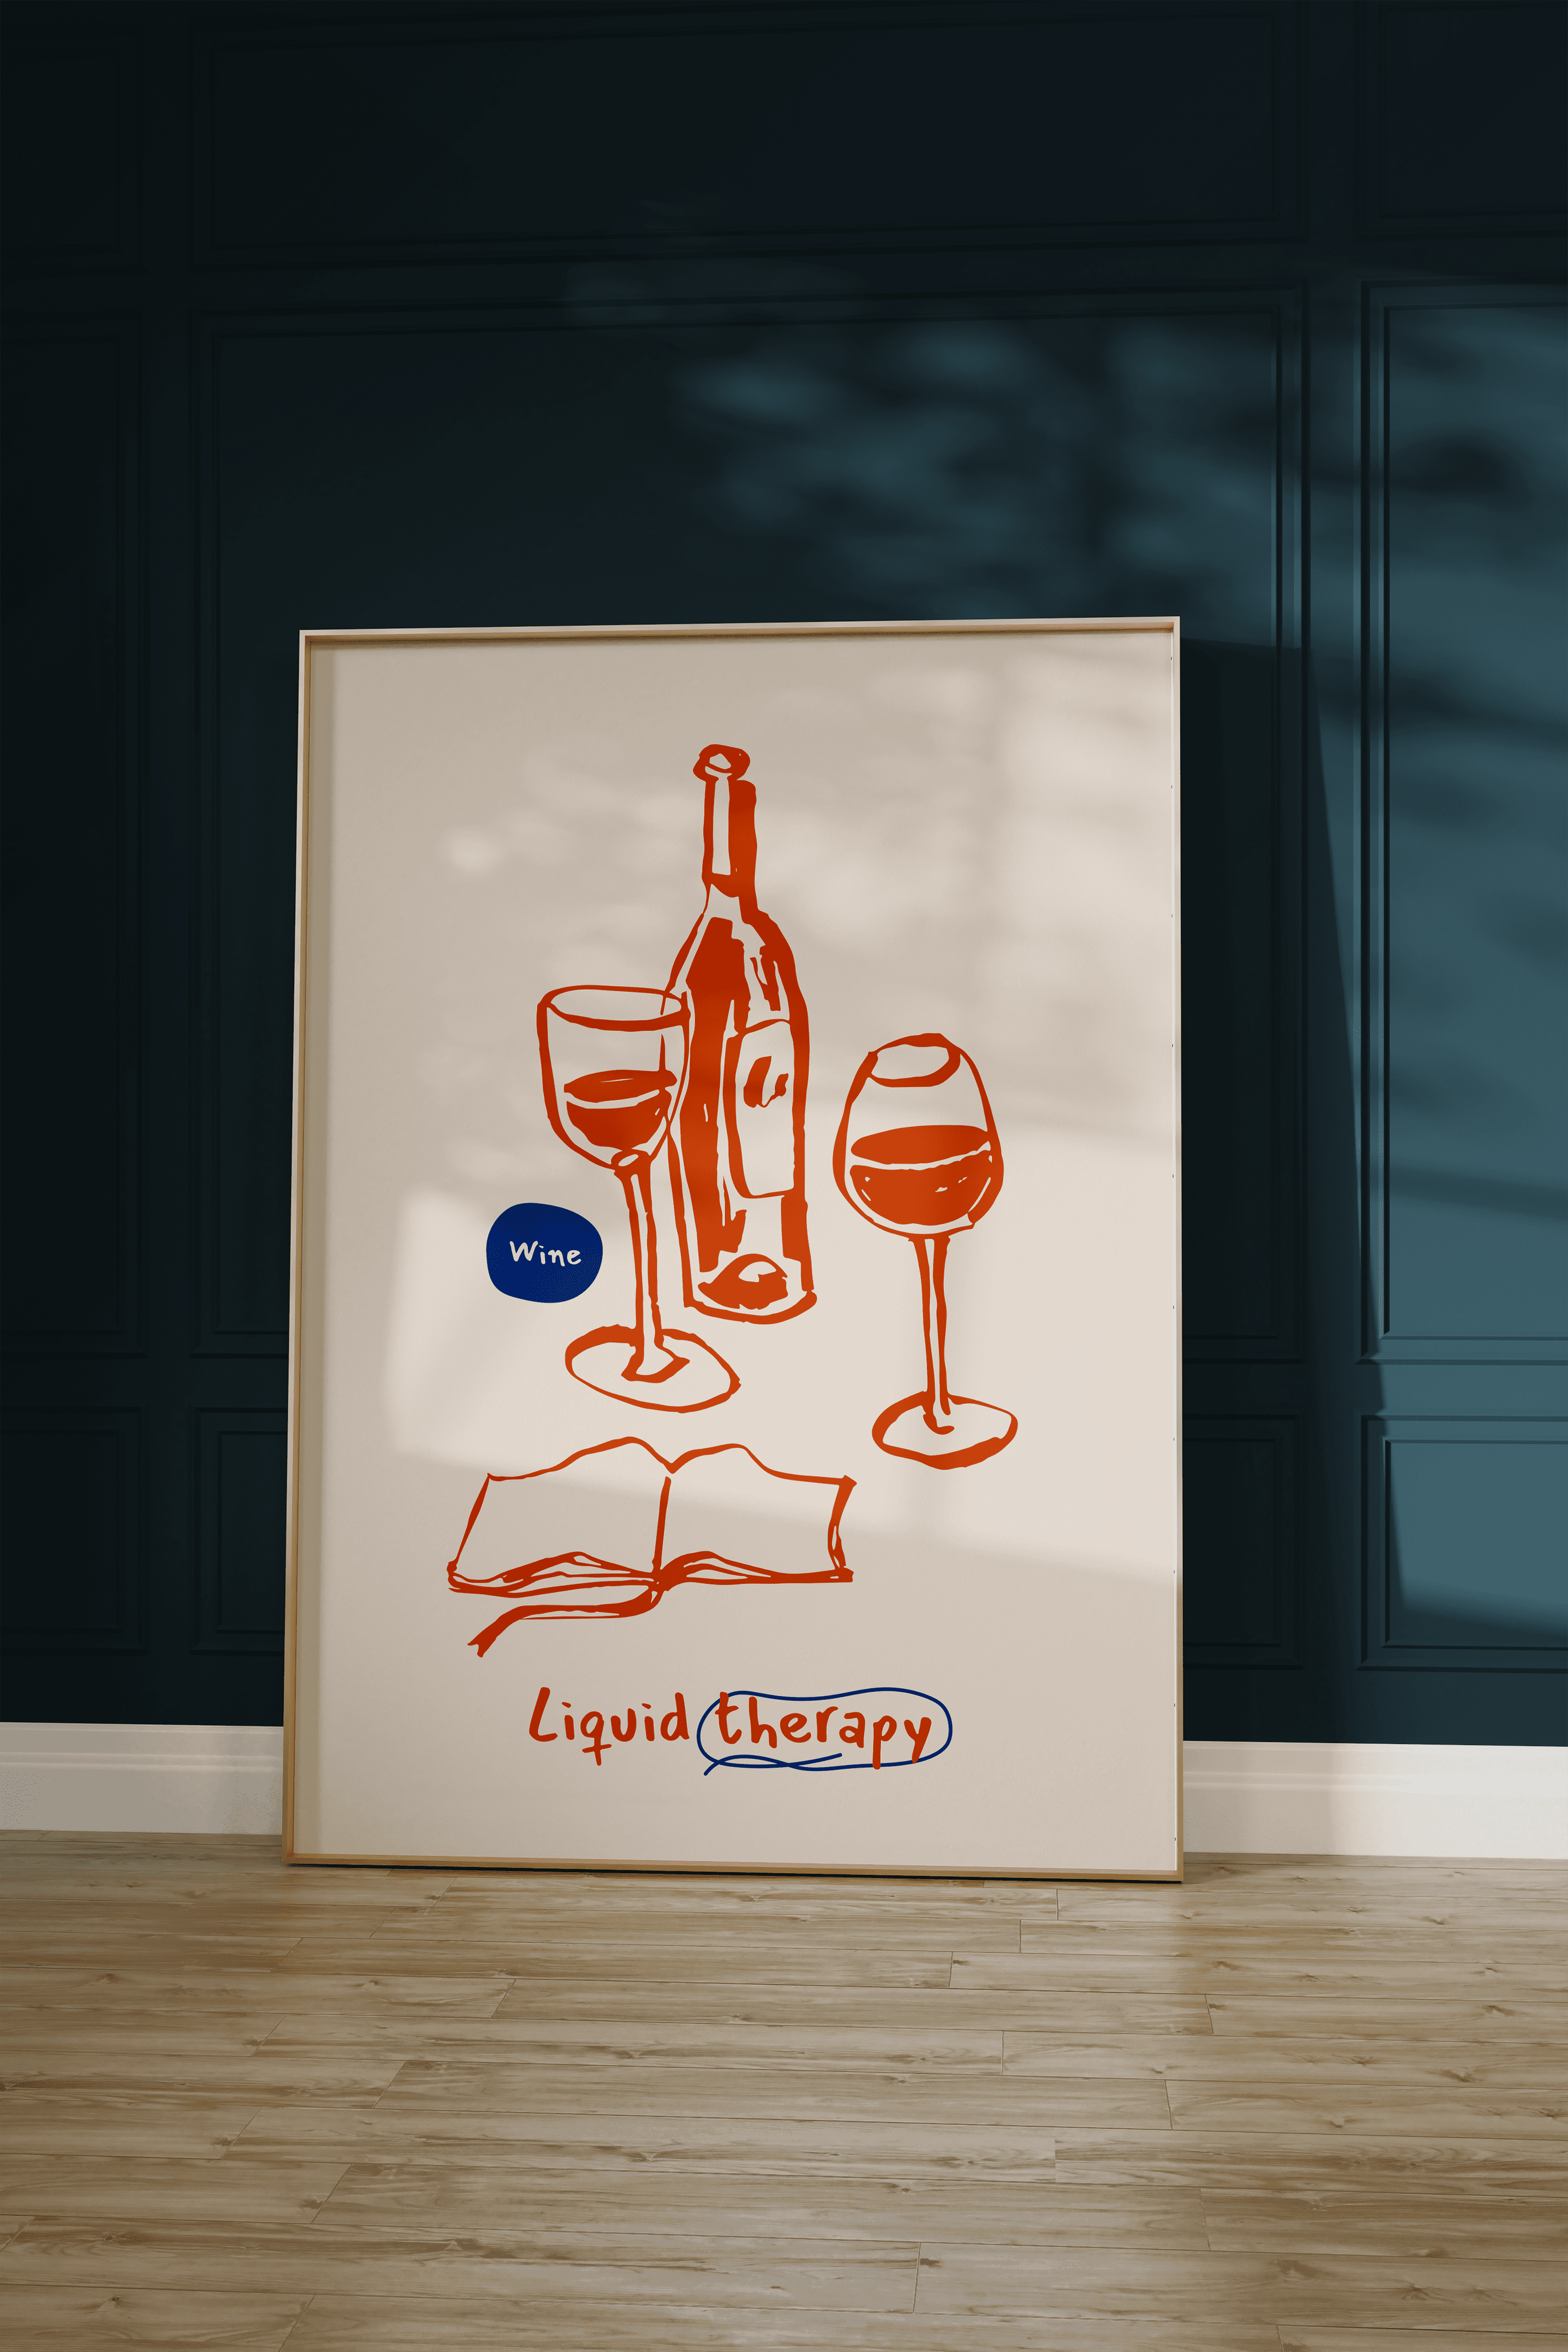 Wine Therapy Unframed Poster